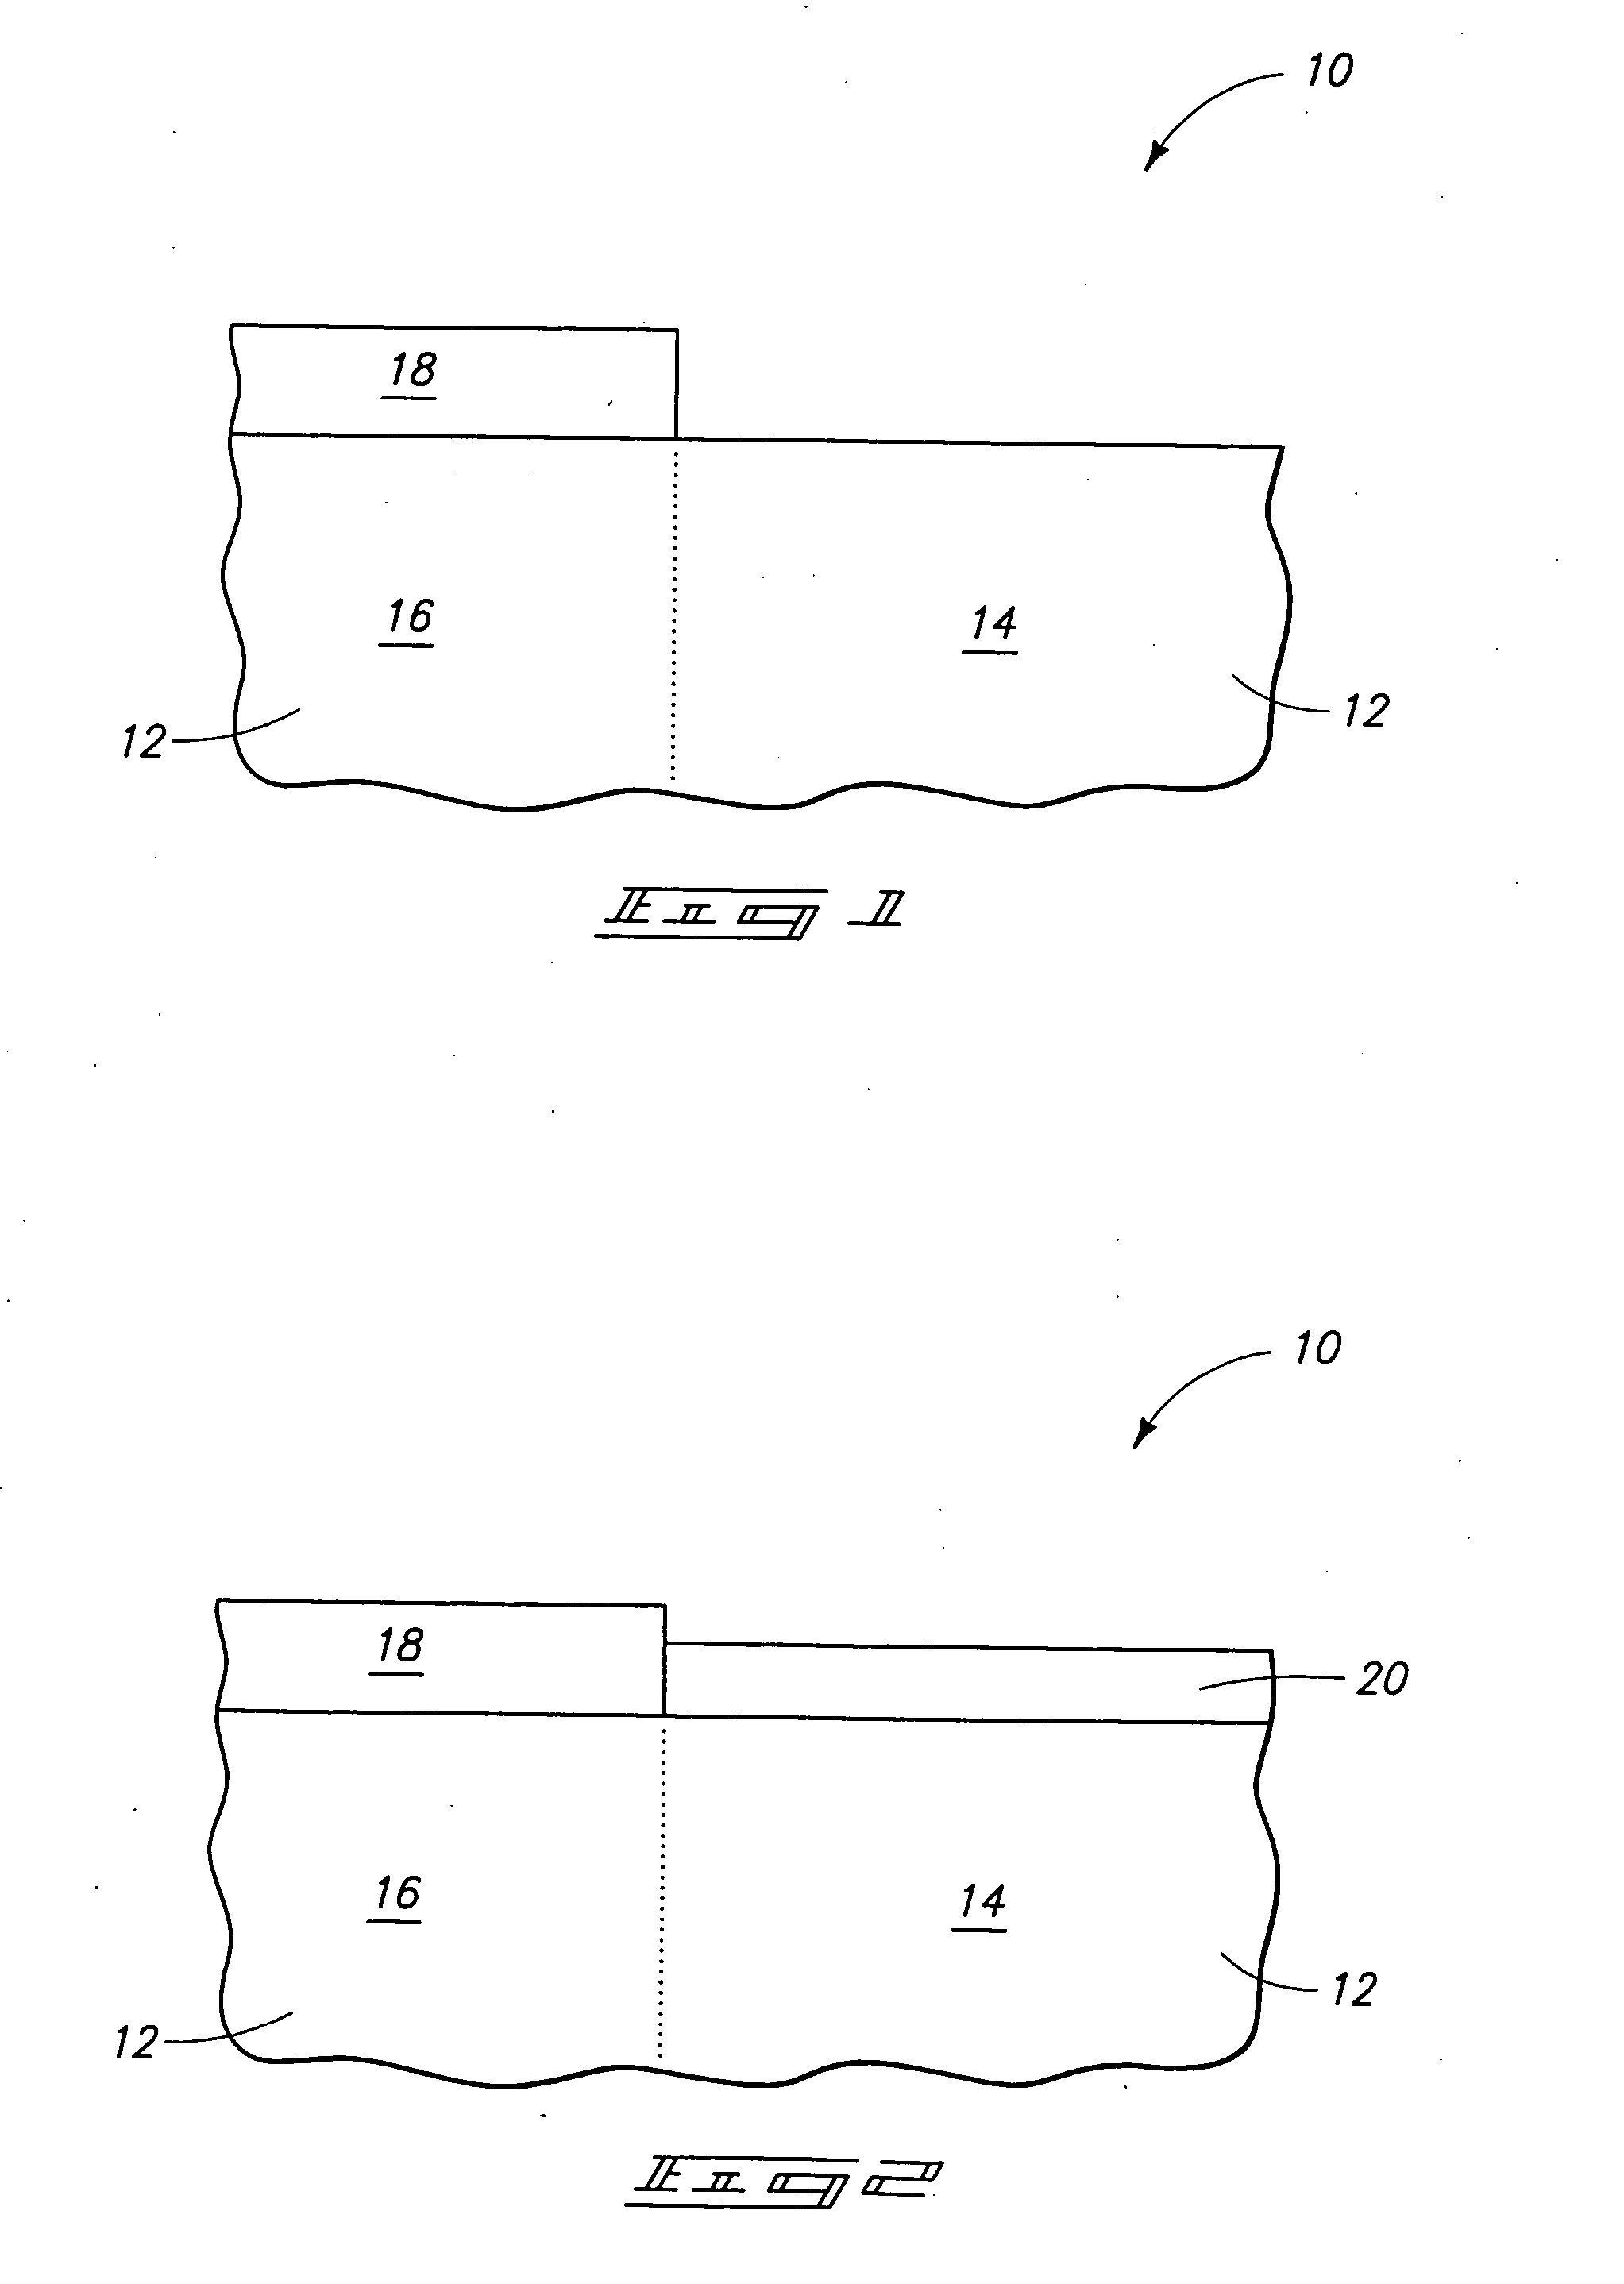 Methods of forming a layer comprising epitaxial silicon, and methods of forming field effect transistors